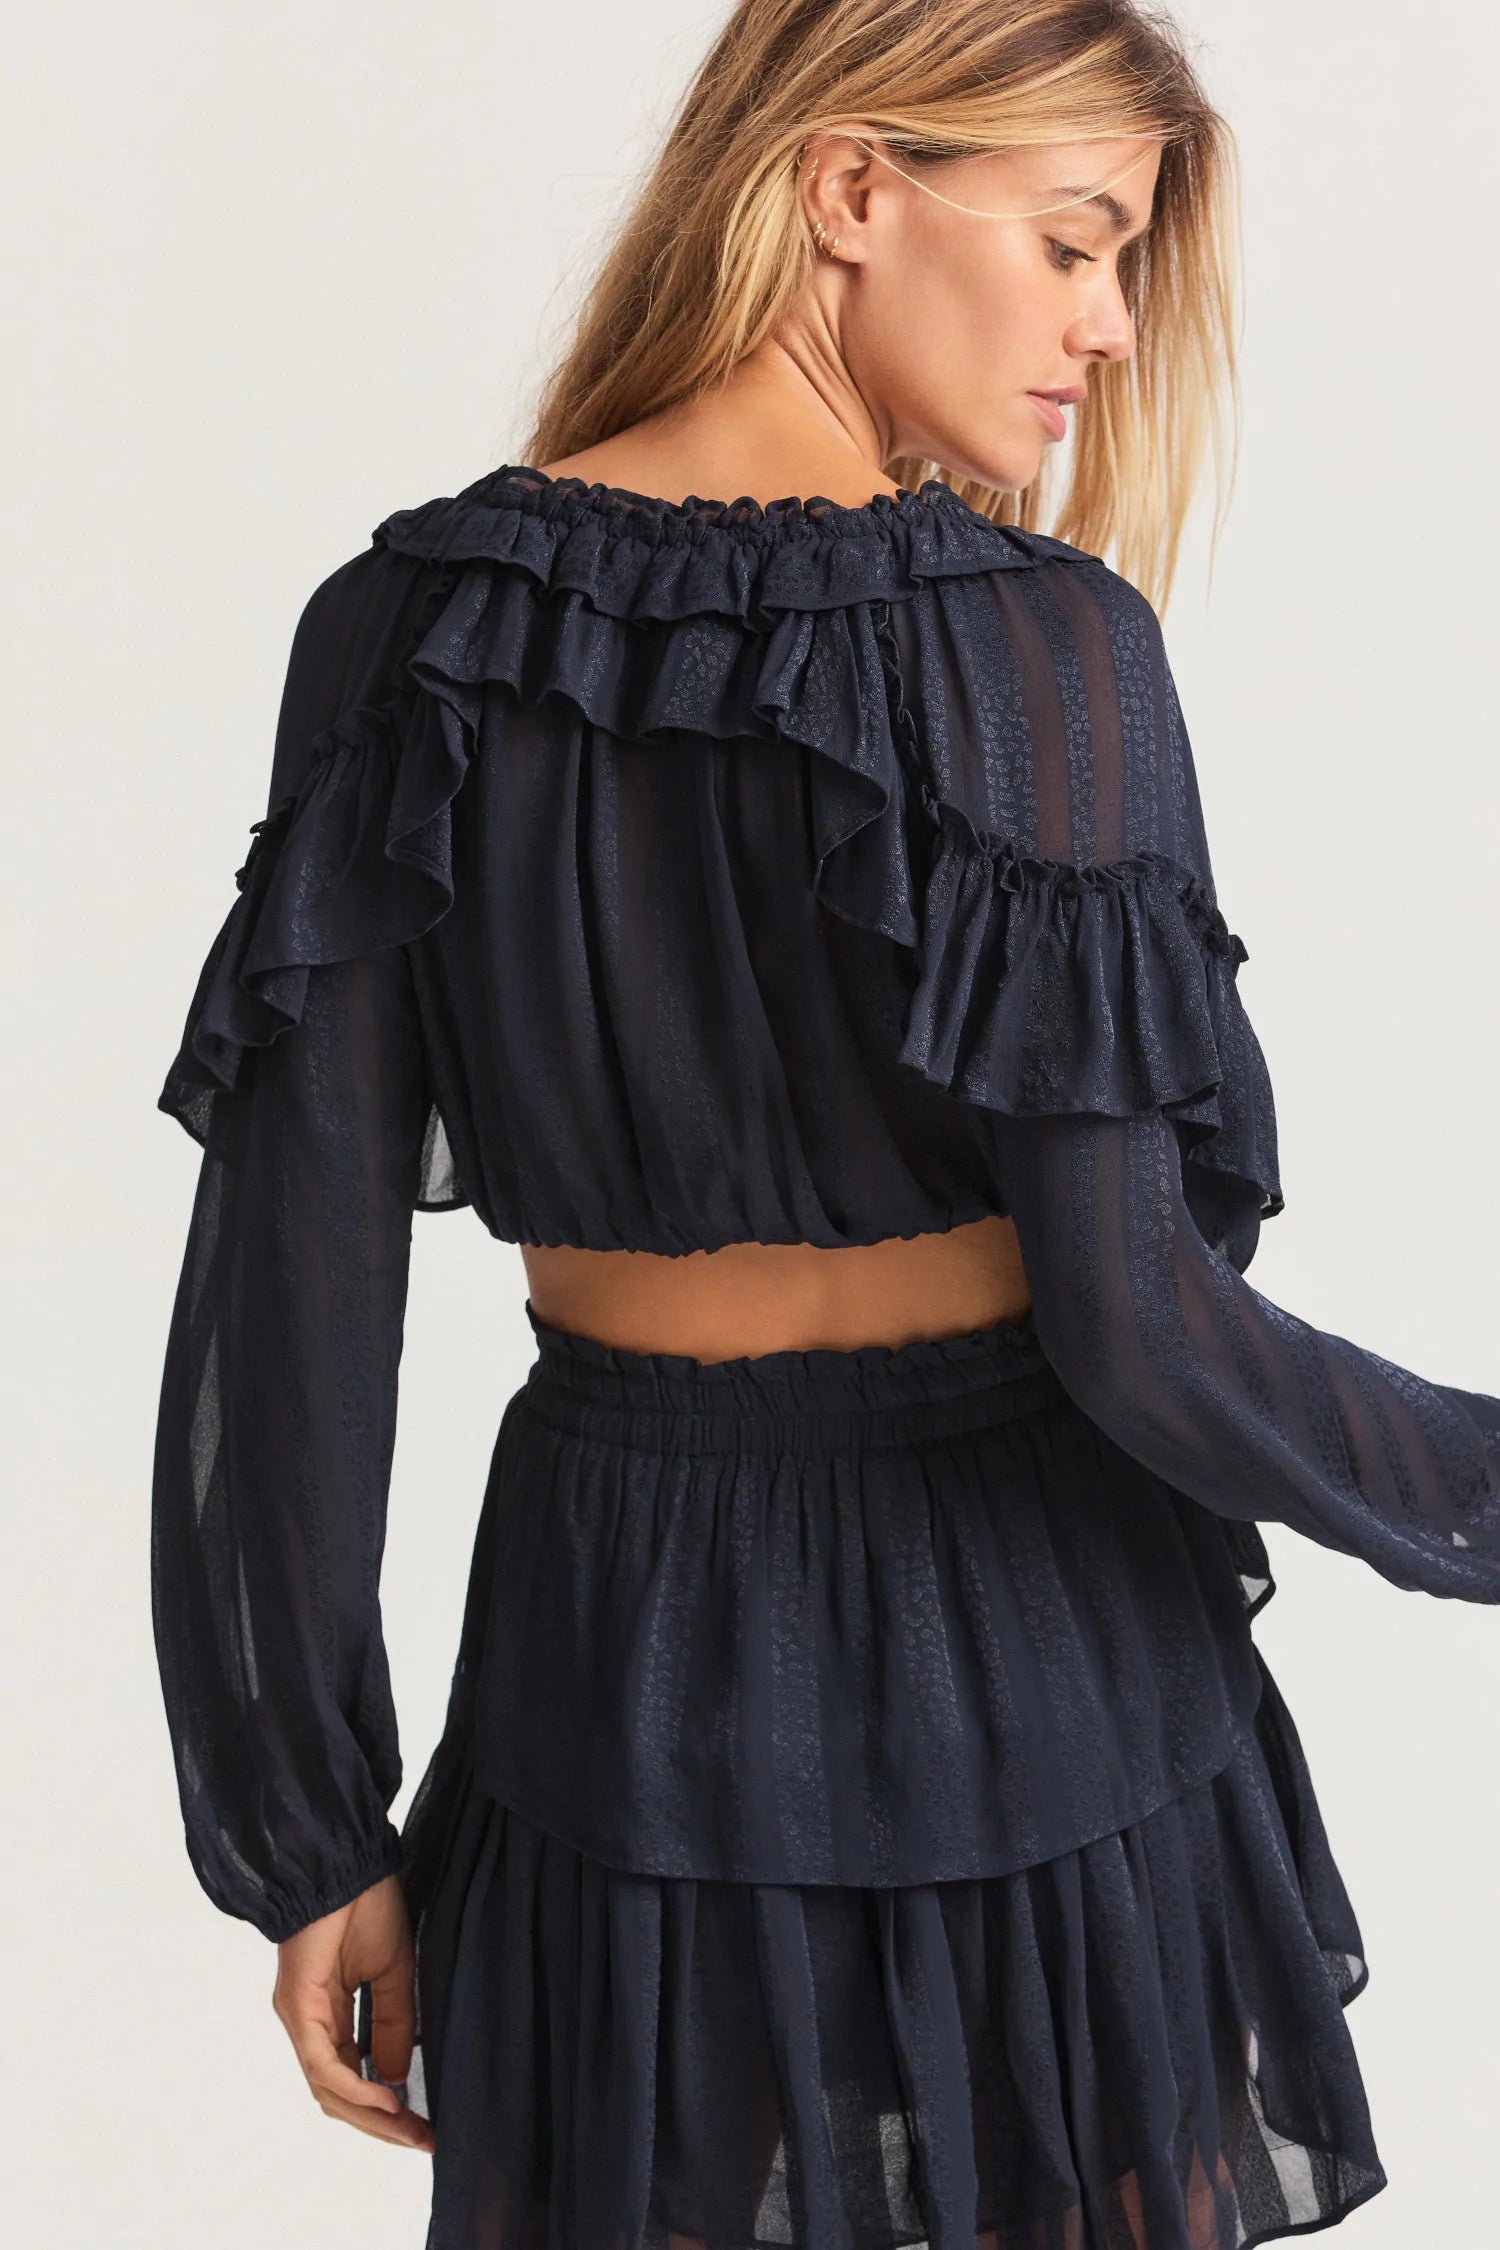 Ruffle Popover Top - Midnight - ONFEMME By Lindsey's Kloset